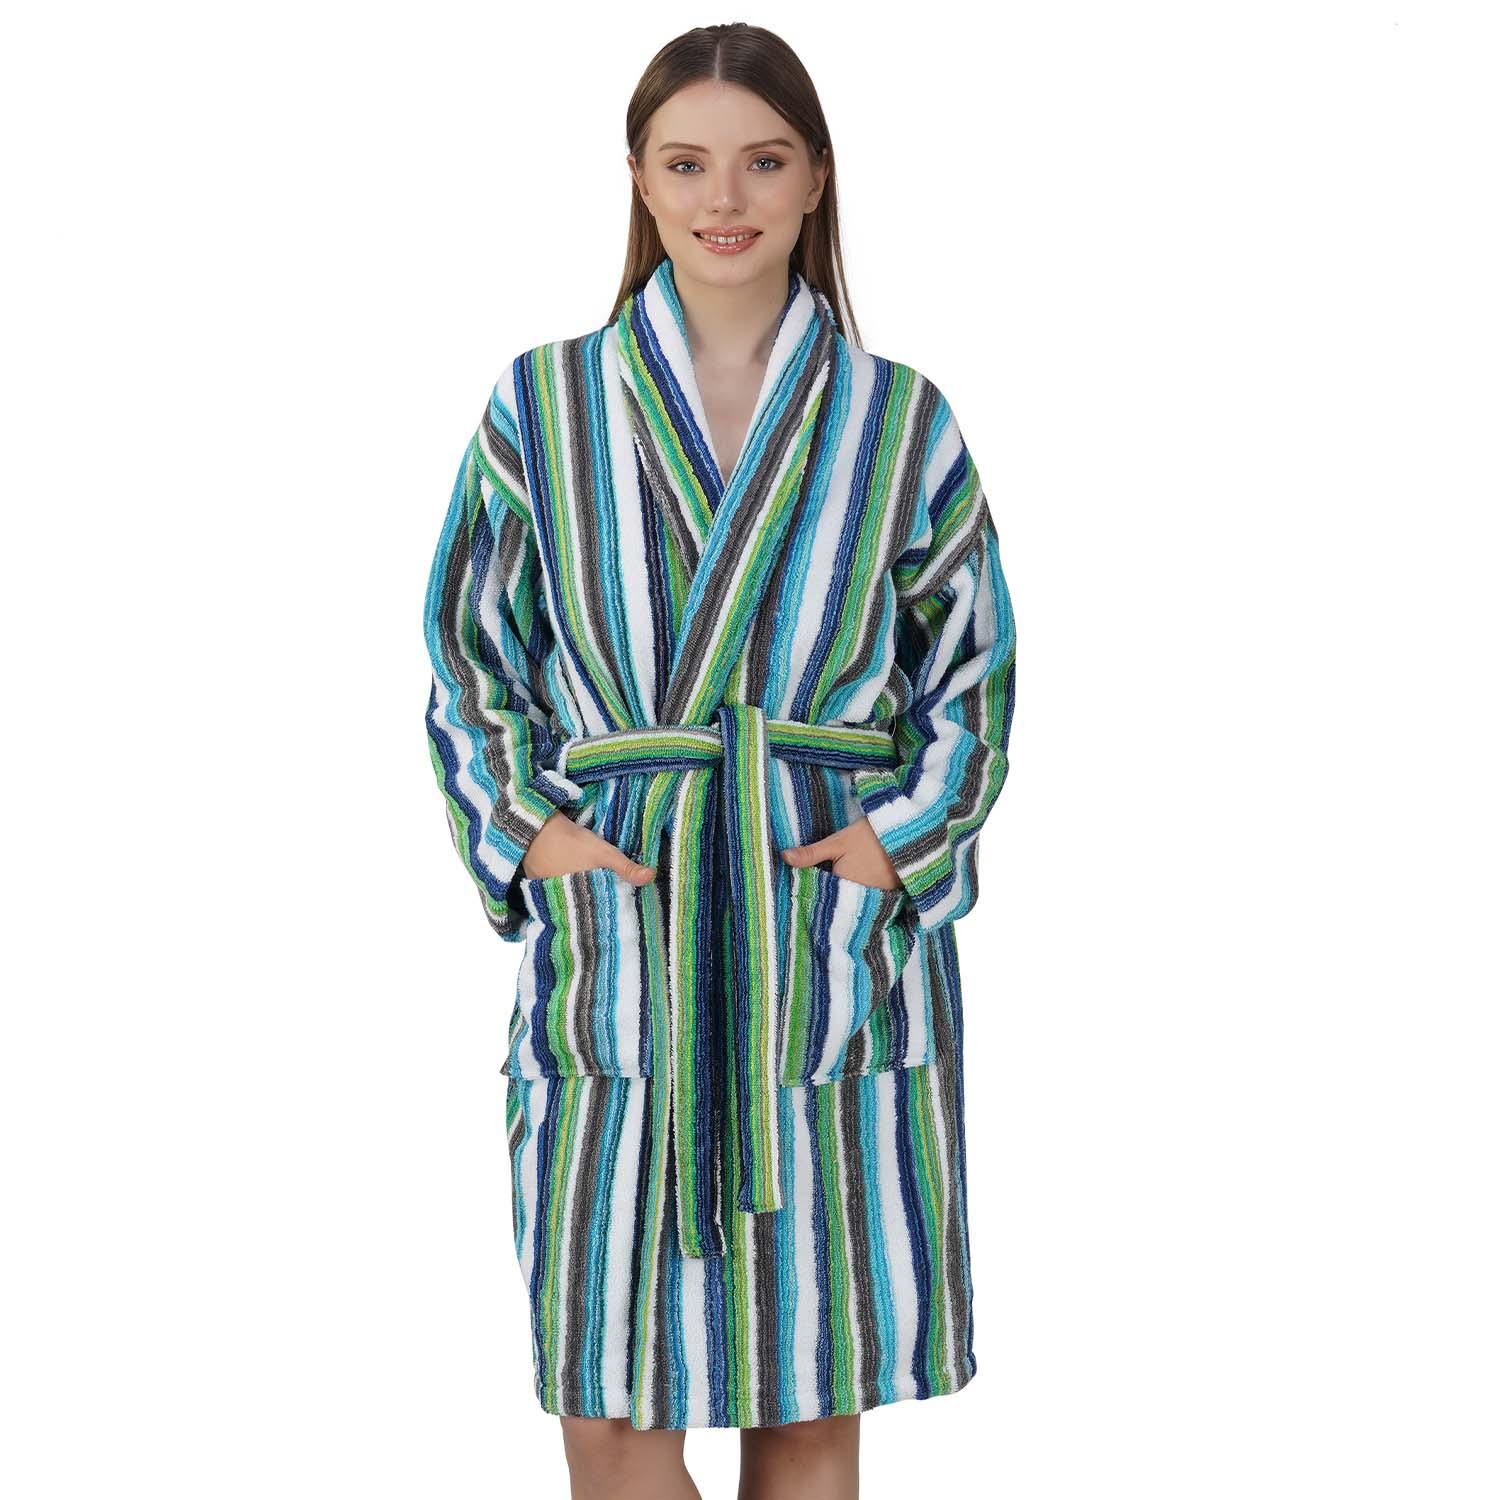 SIX-PIECE COTTON BLUE AND WHITE BATHROBE SET – Noble Home Gifts